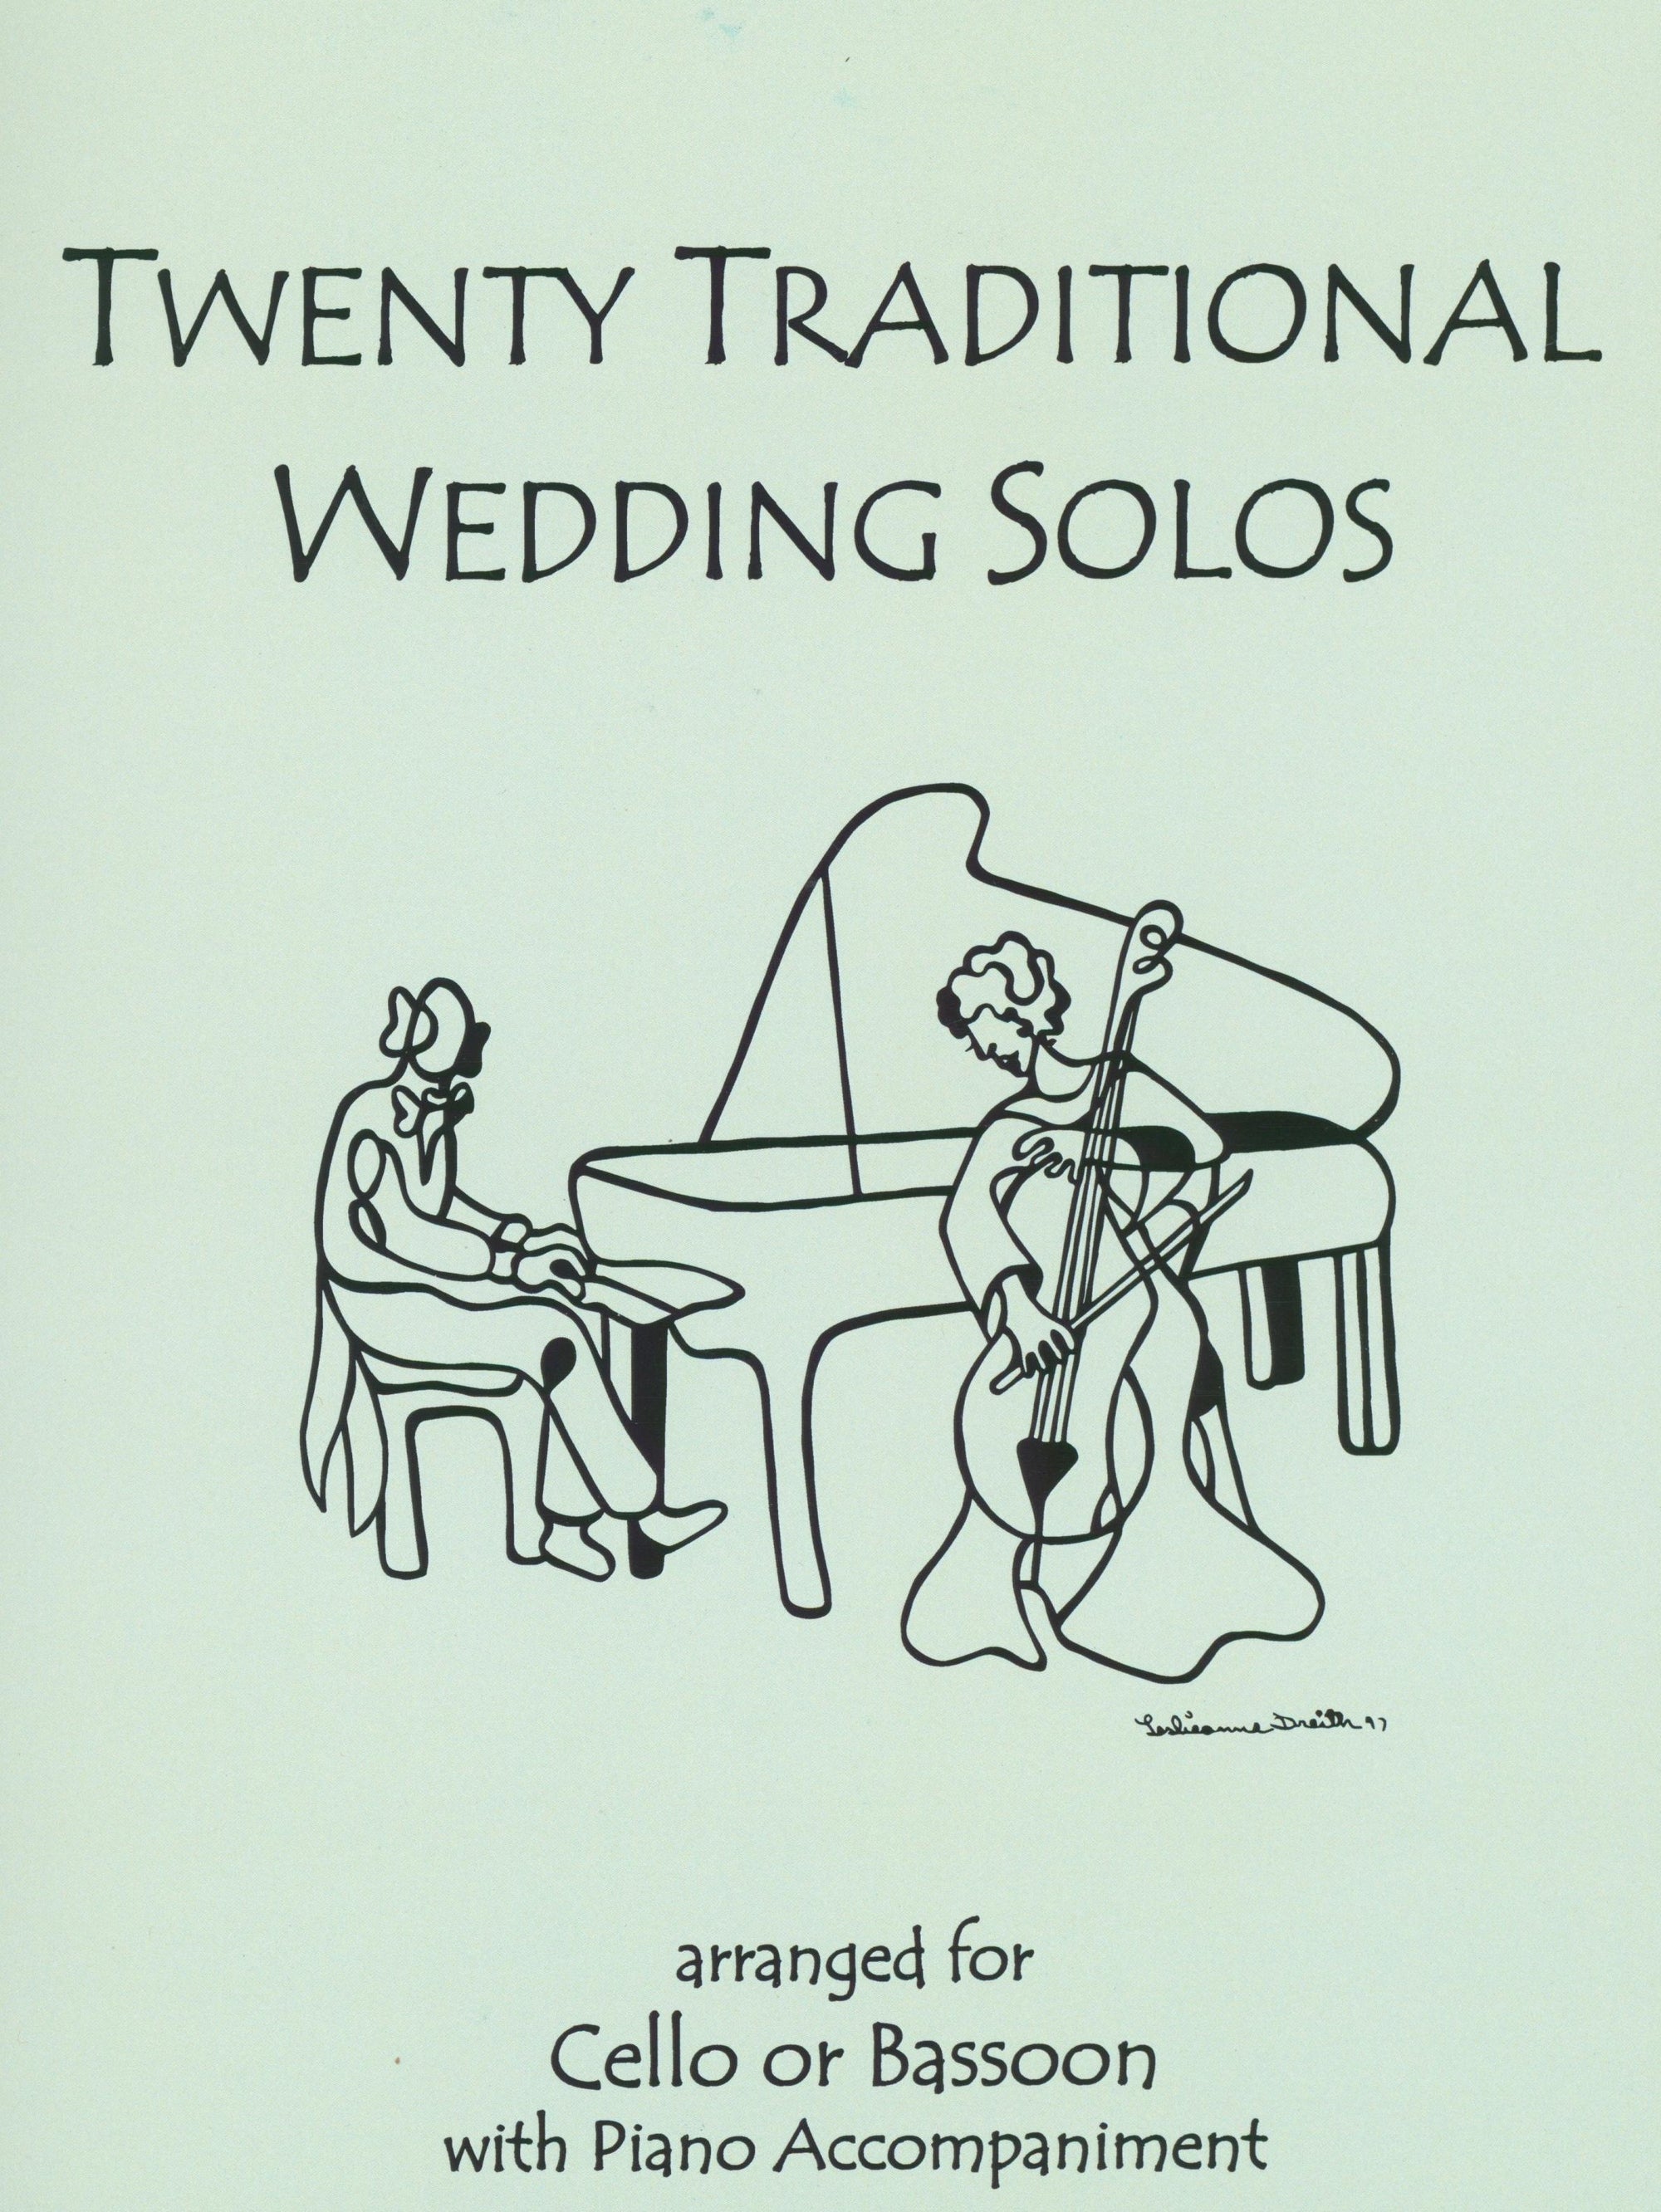 20 Traditional Wedding Solos (arr. for cello or bassoon with piano)